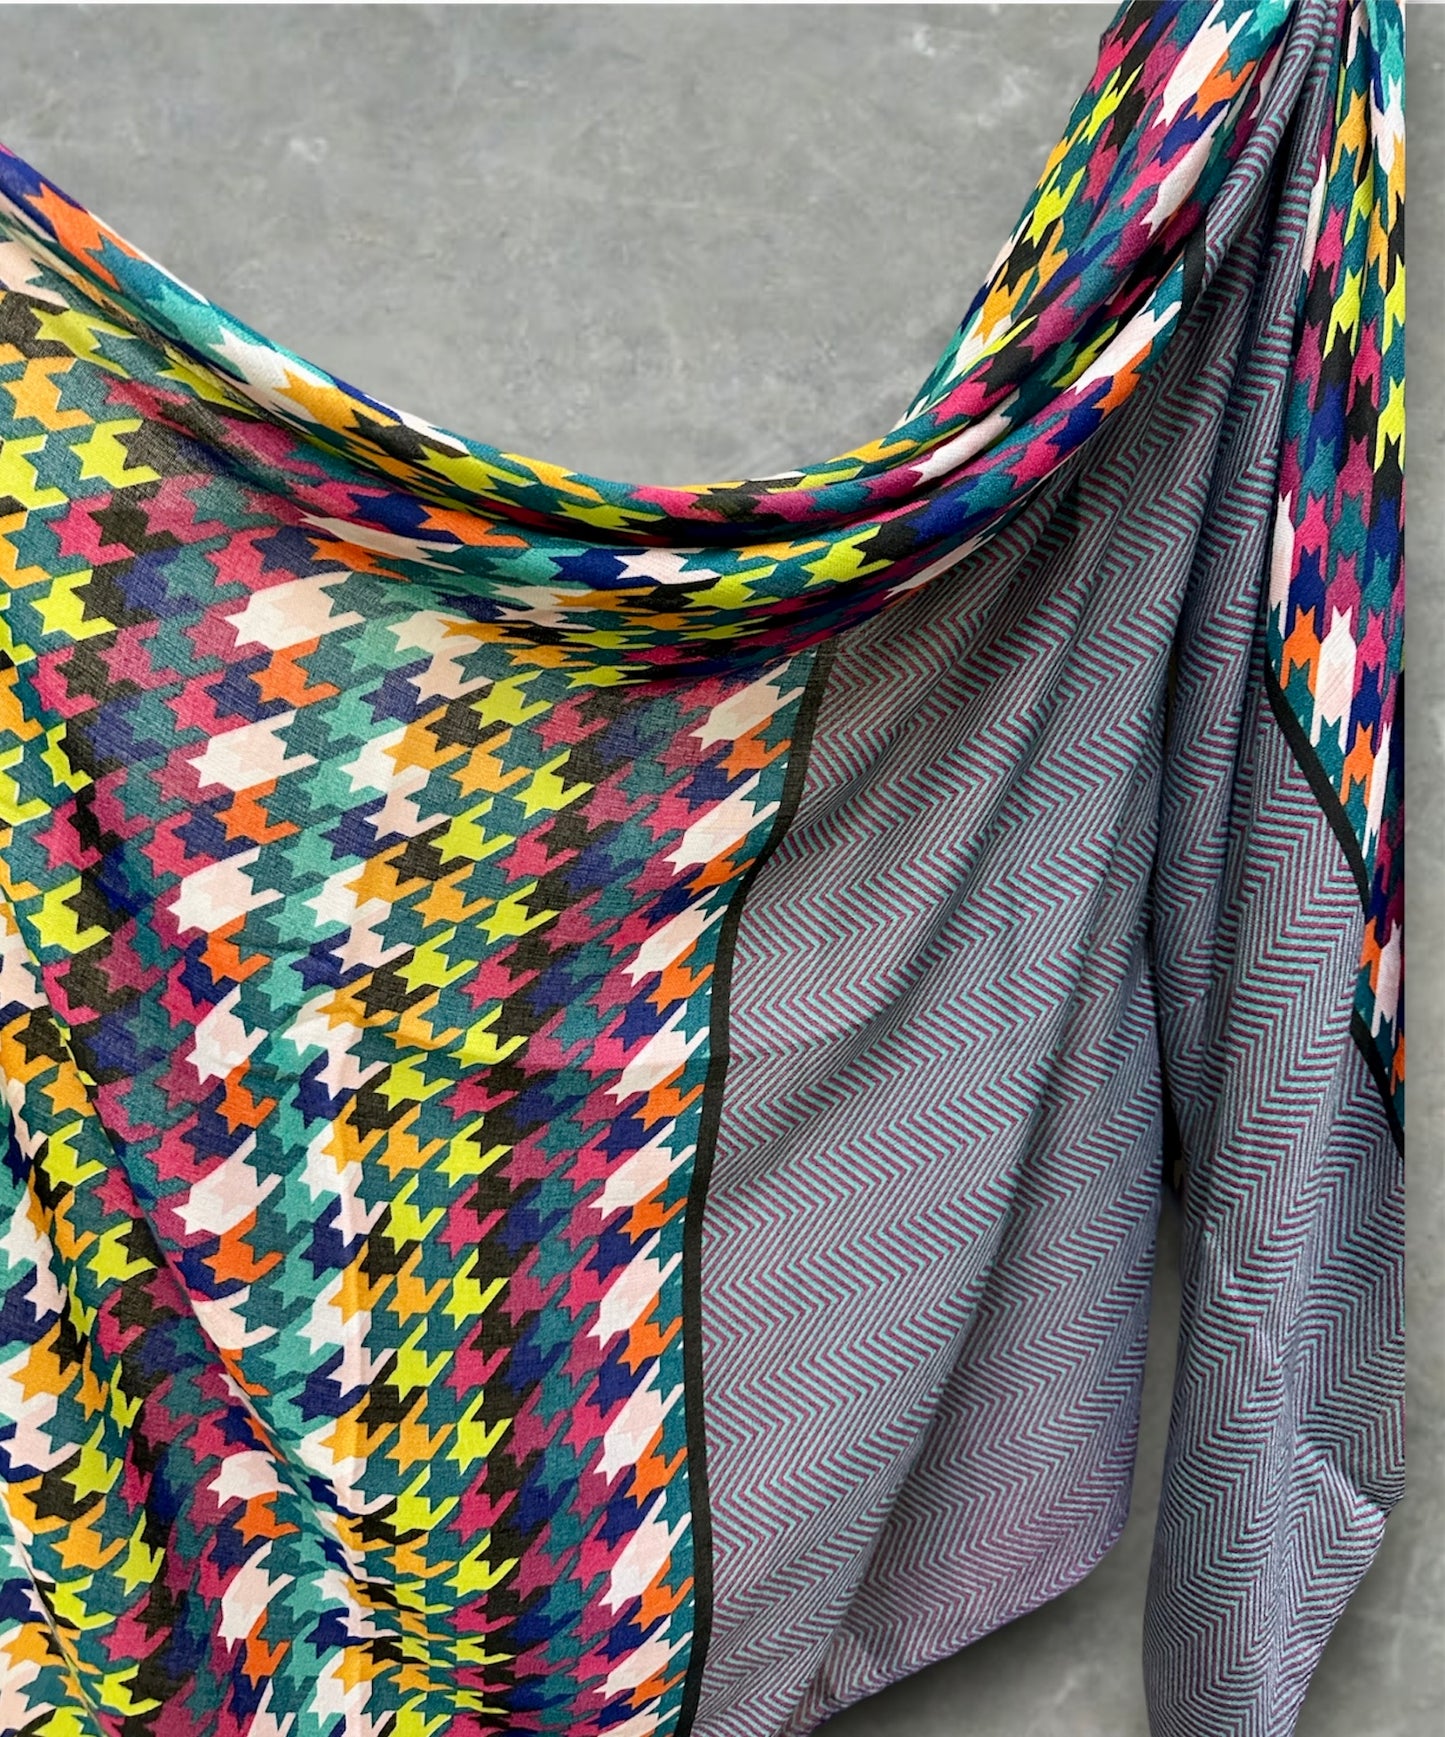 Blue Cotton Scarf with Eco-Friendly Multicolour Houndstooth Pattern – A Stylish and Sustainable Gift for Mom, Perfect for Birthday and Christmas Celebrations